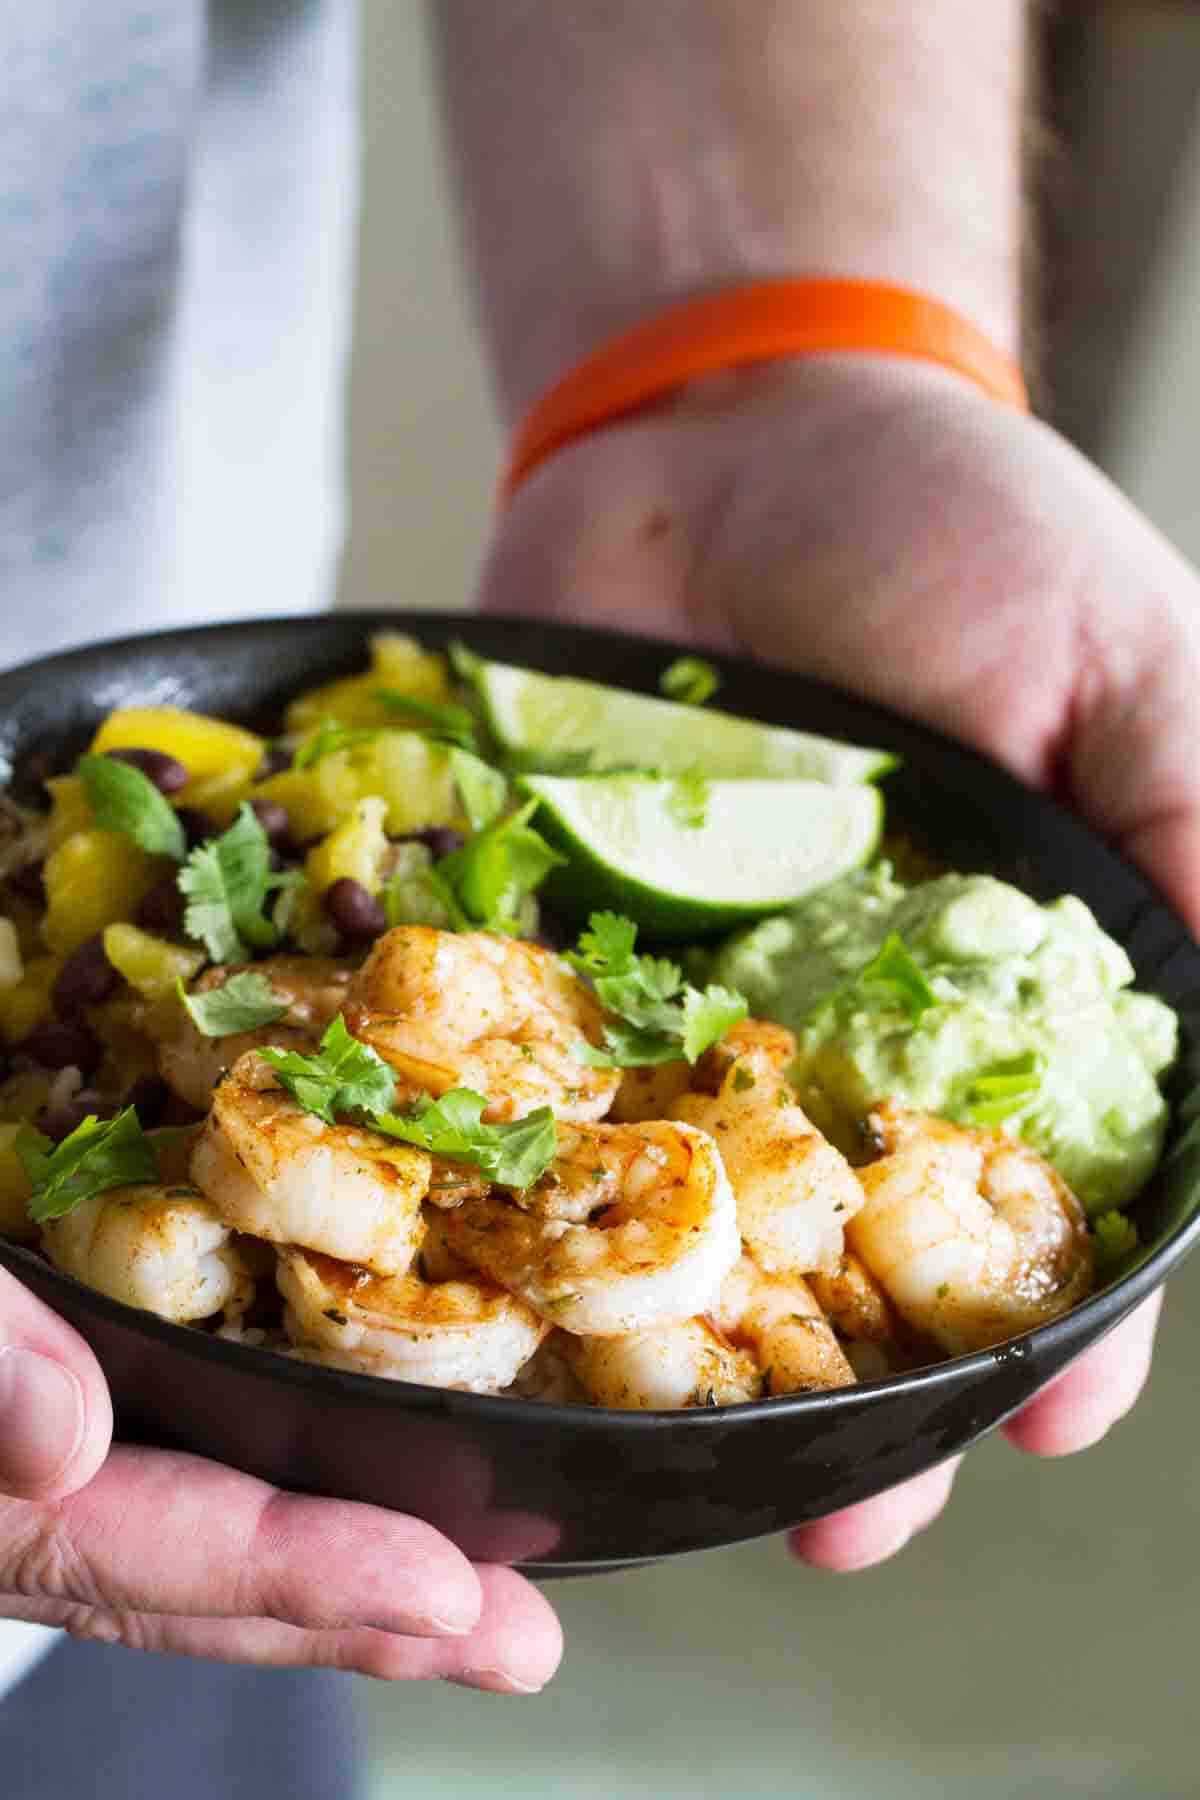 Hands holding a bowl filled with shrimp, rice, pineapple, mango, and avocado.